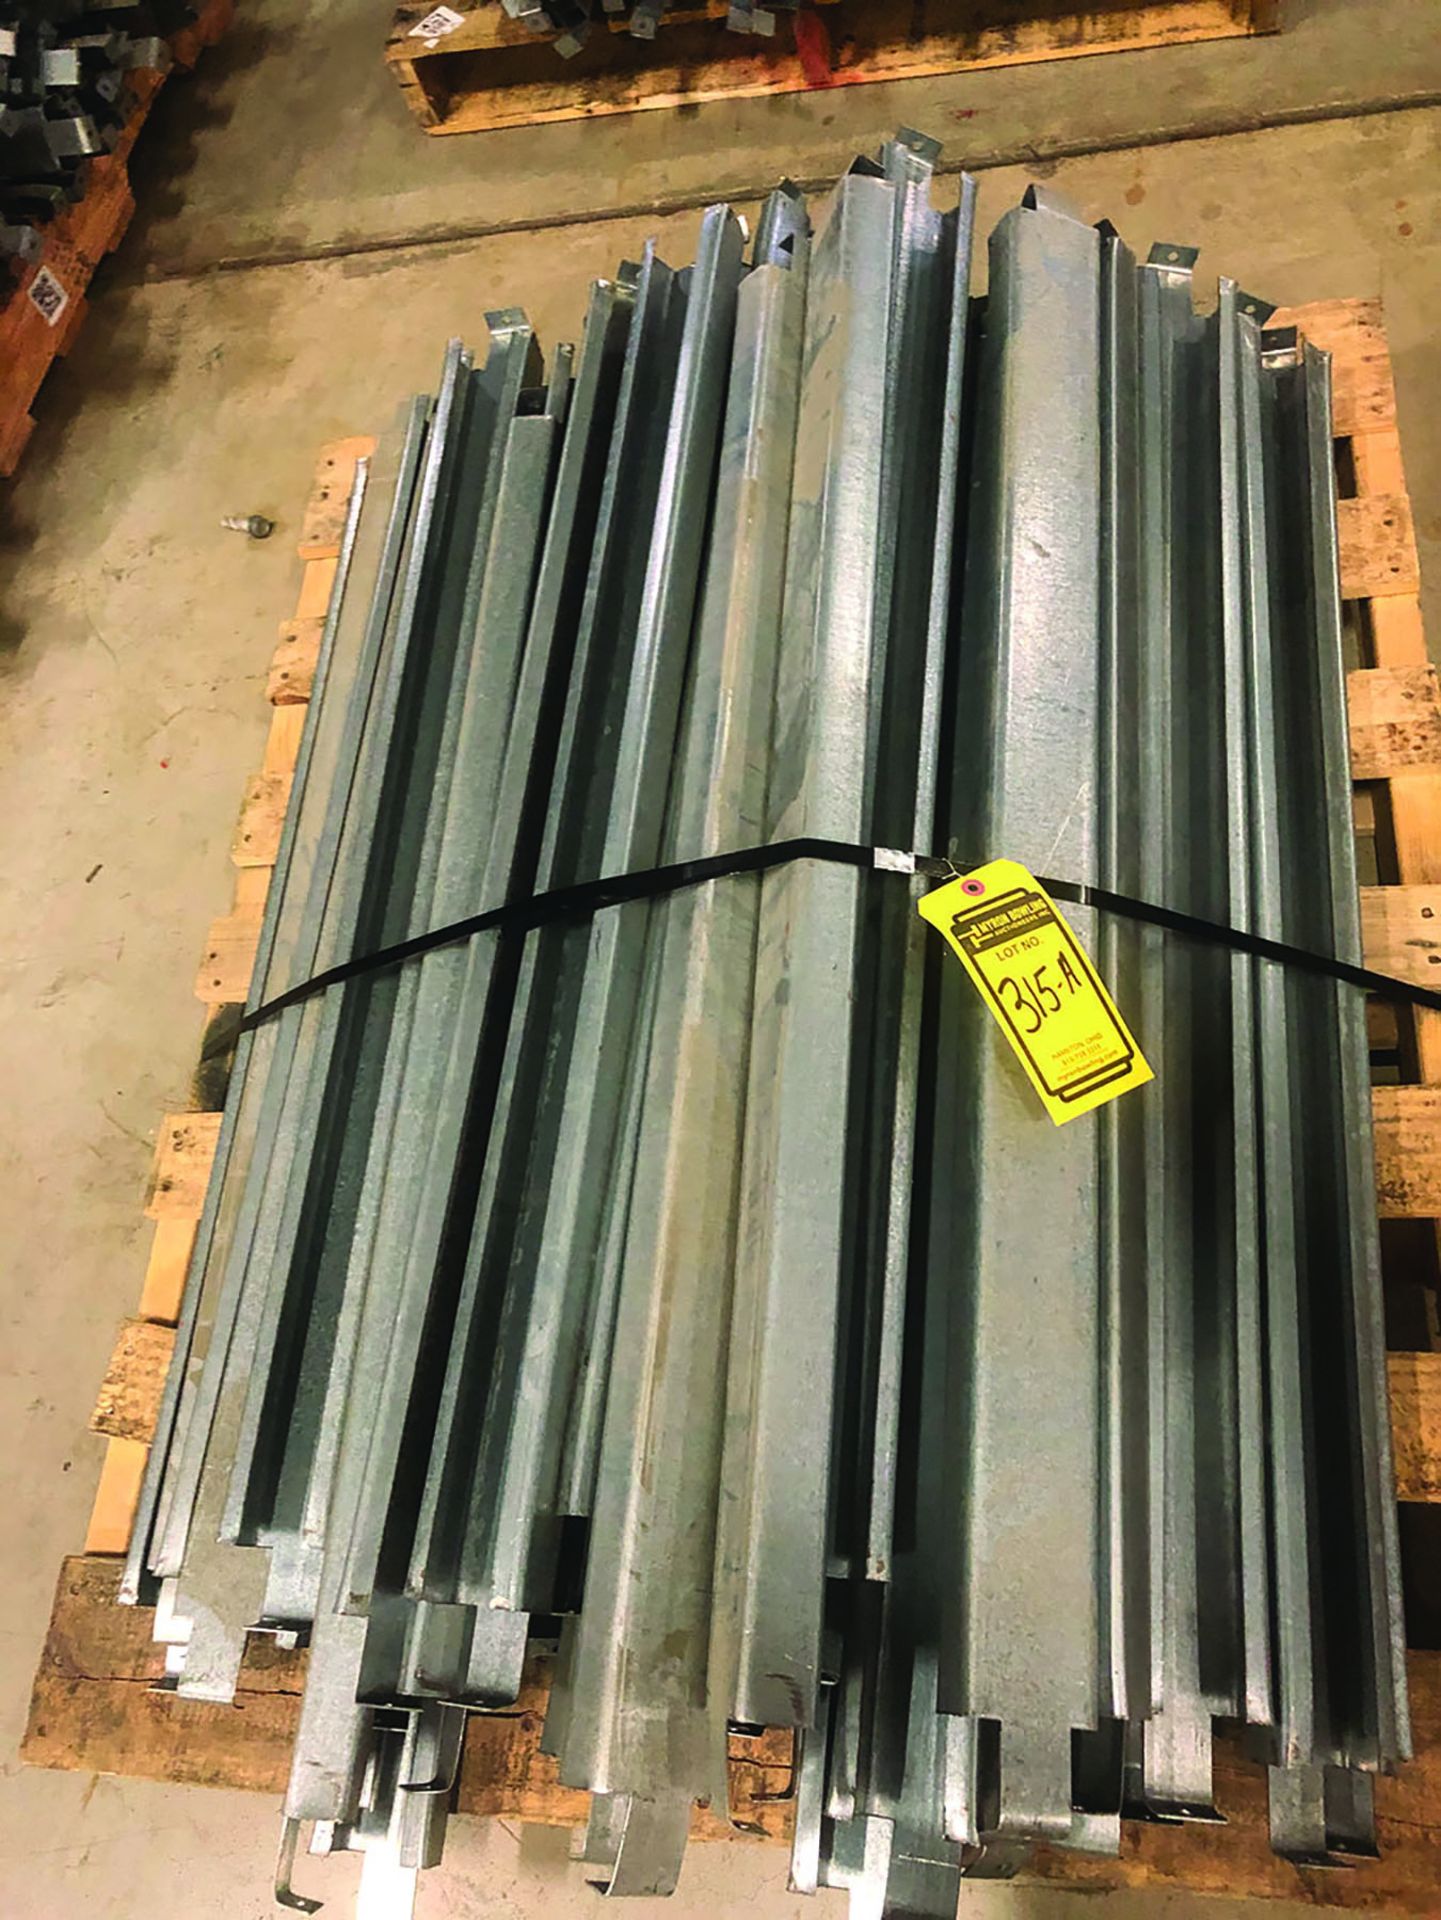 SKID OF FLANGED PALLET SUPPORTS